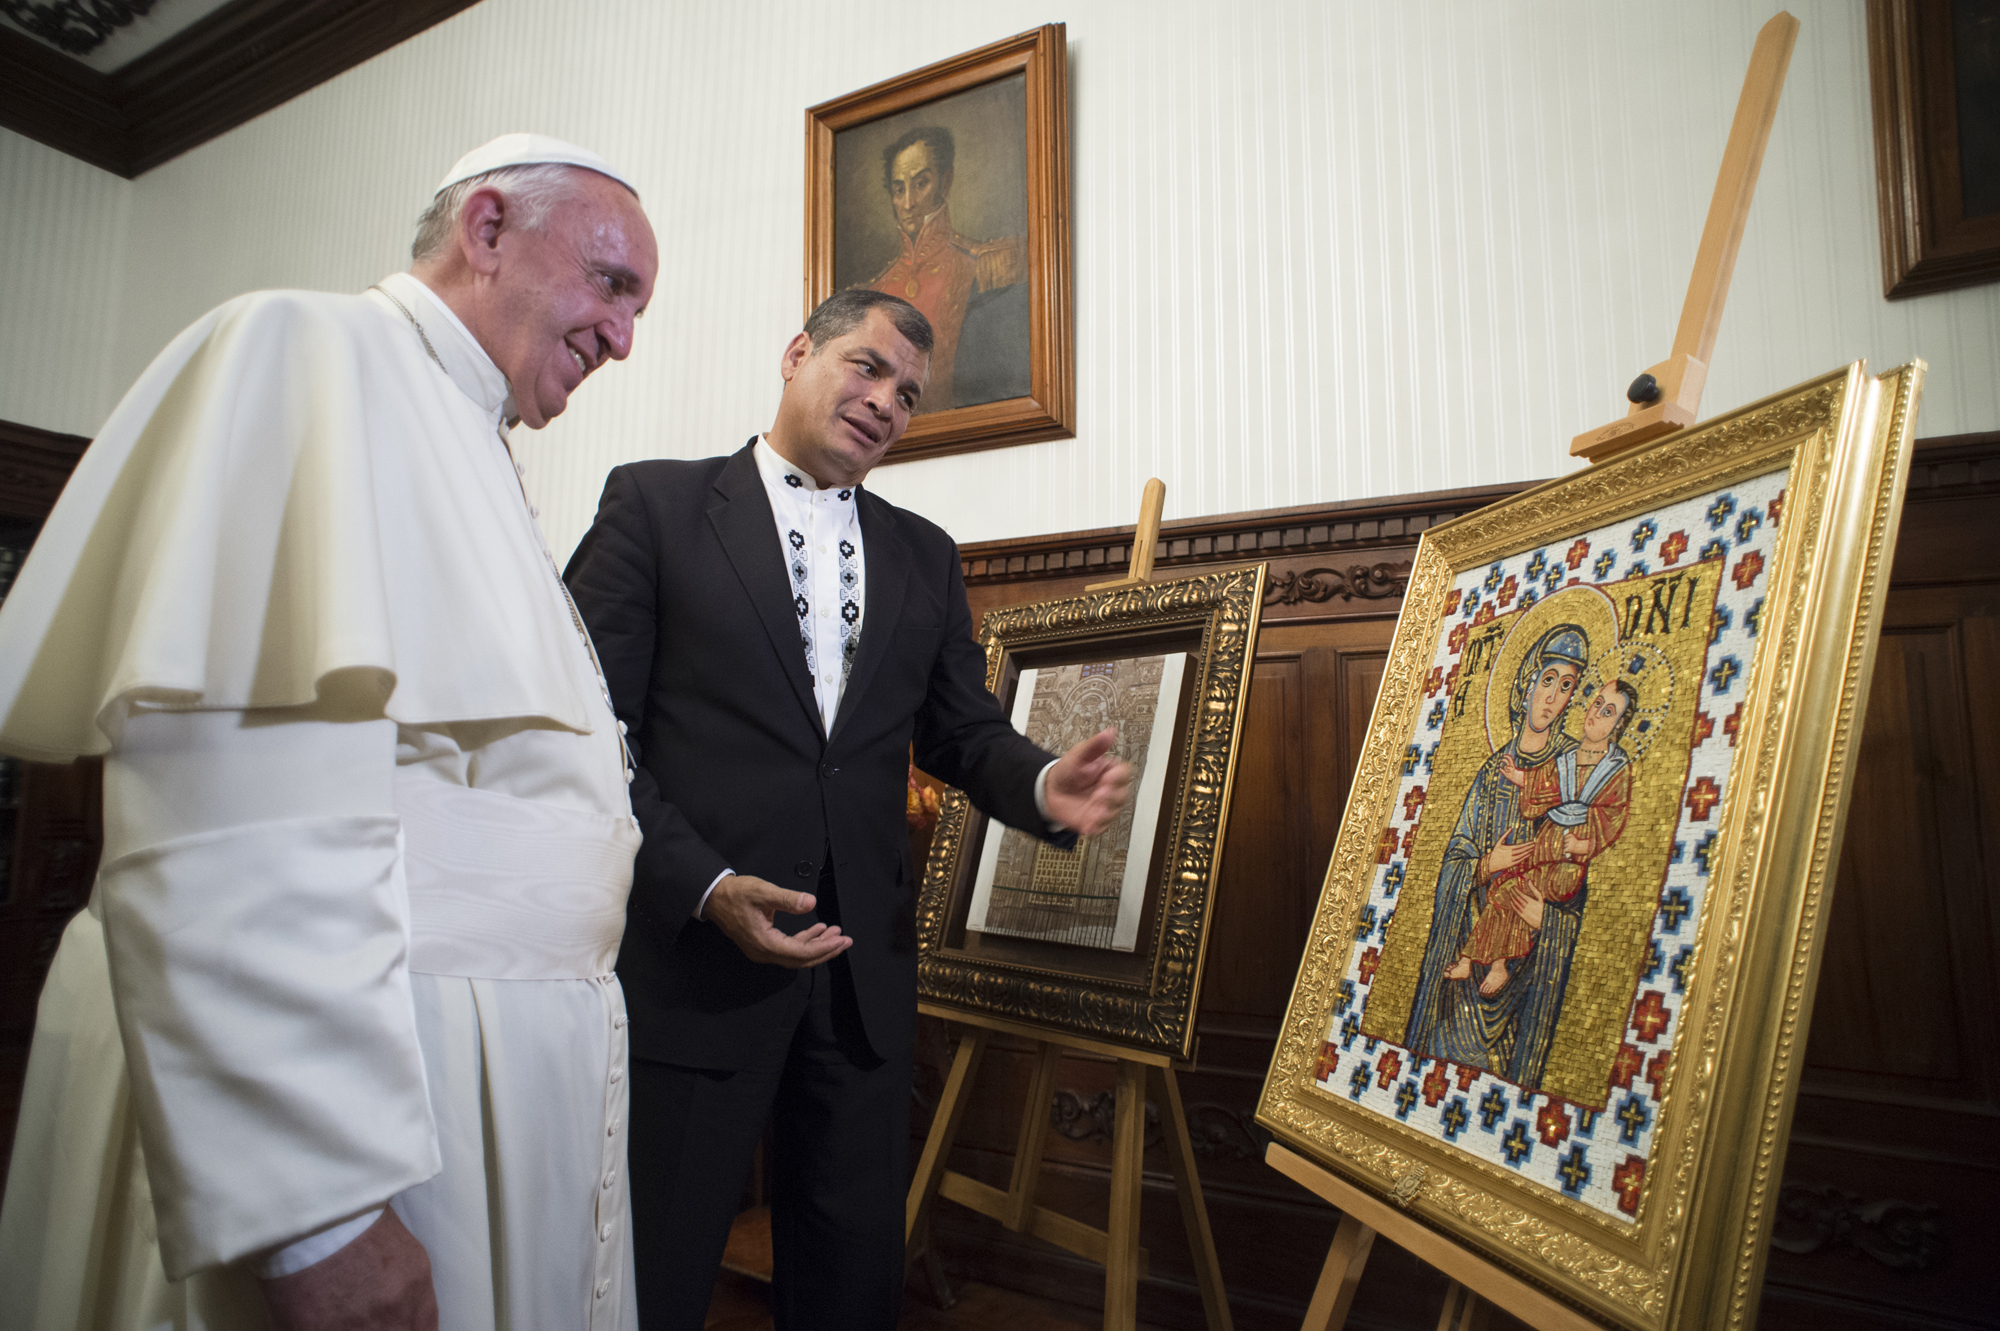 Courtesy Visit by Pope Francis to President Rafael Correa at the Carondelet Palace